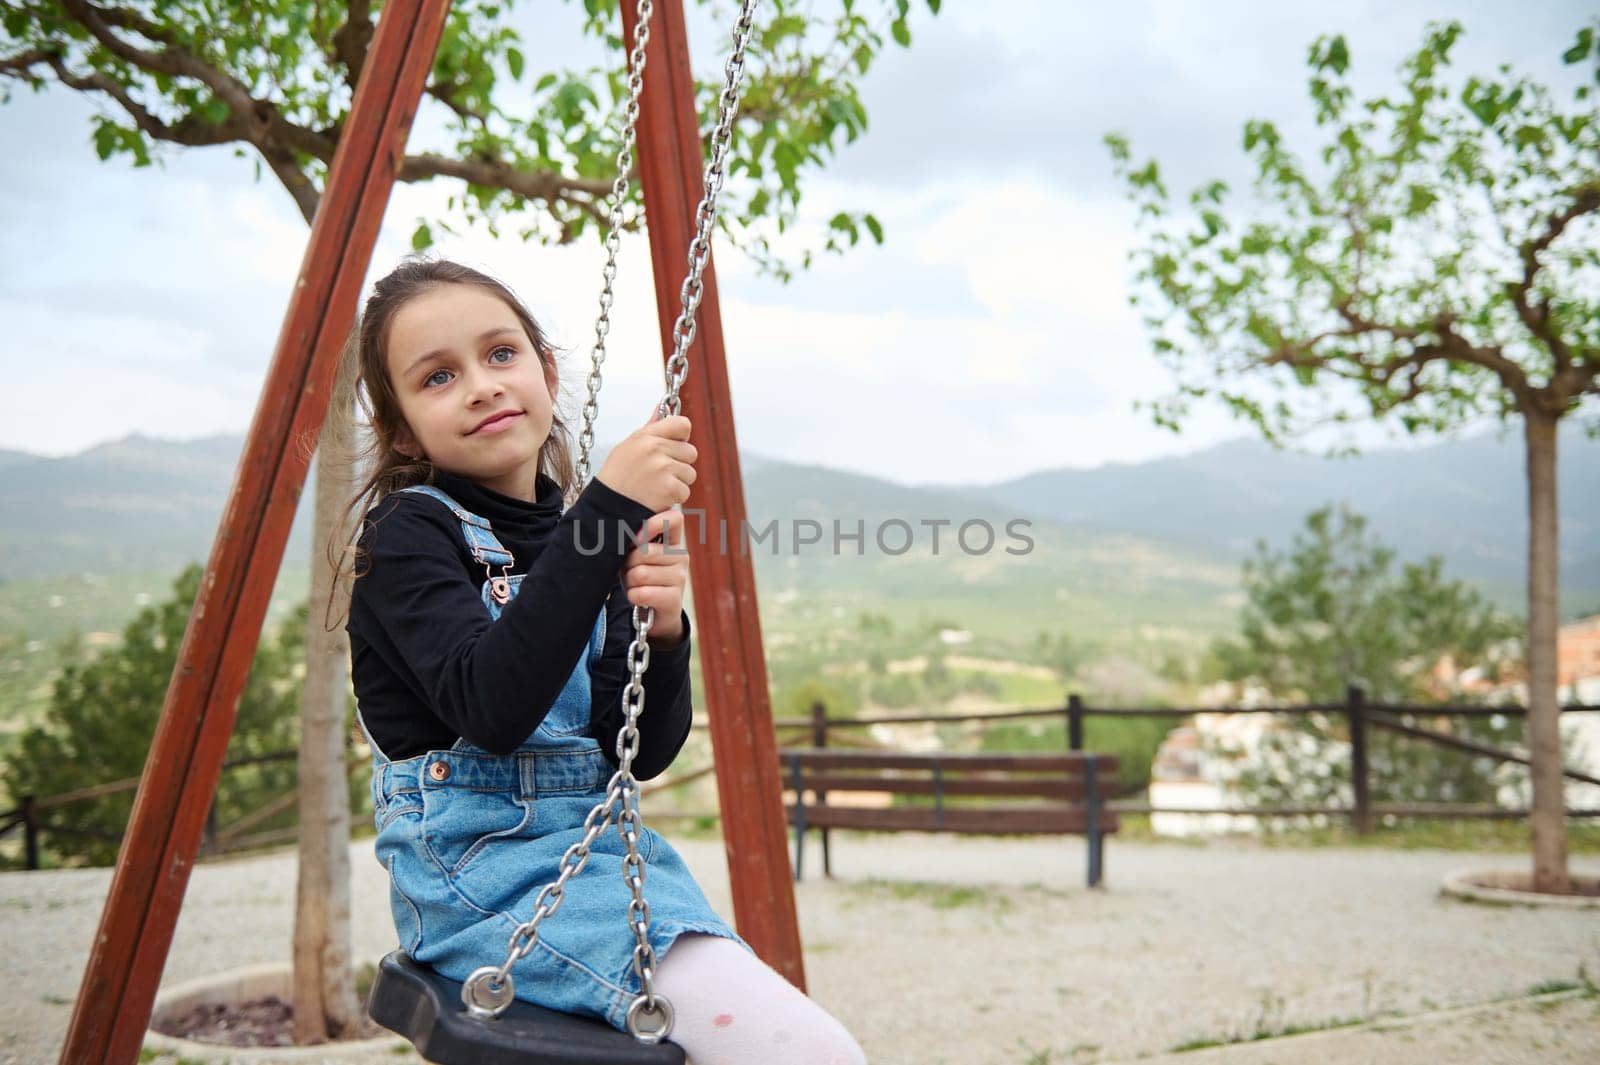 Little child girl smiling and dreamily looking away while sitting on a wooden swing in the playground outdoors. People. Happy carefree childhood. Recreation. Kids development and entertainment